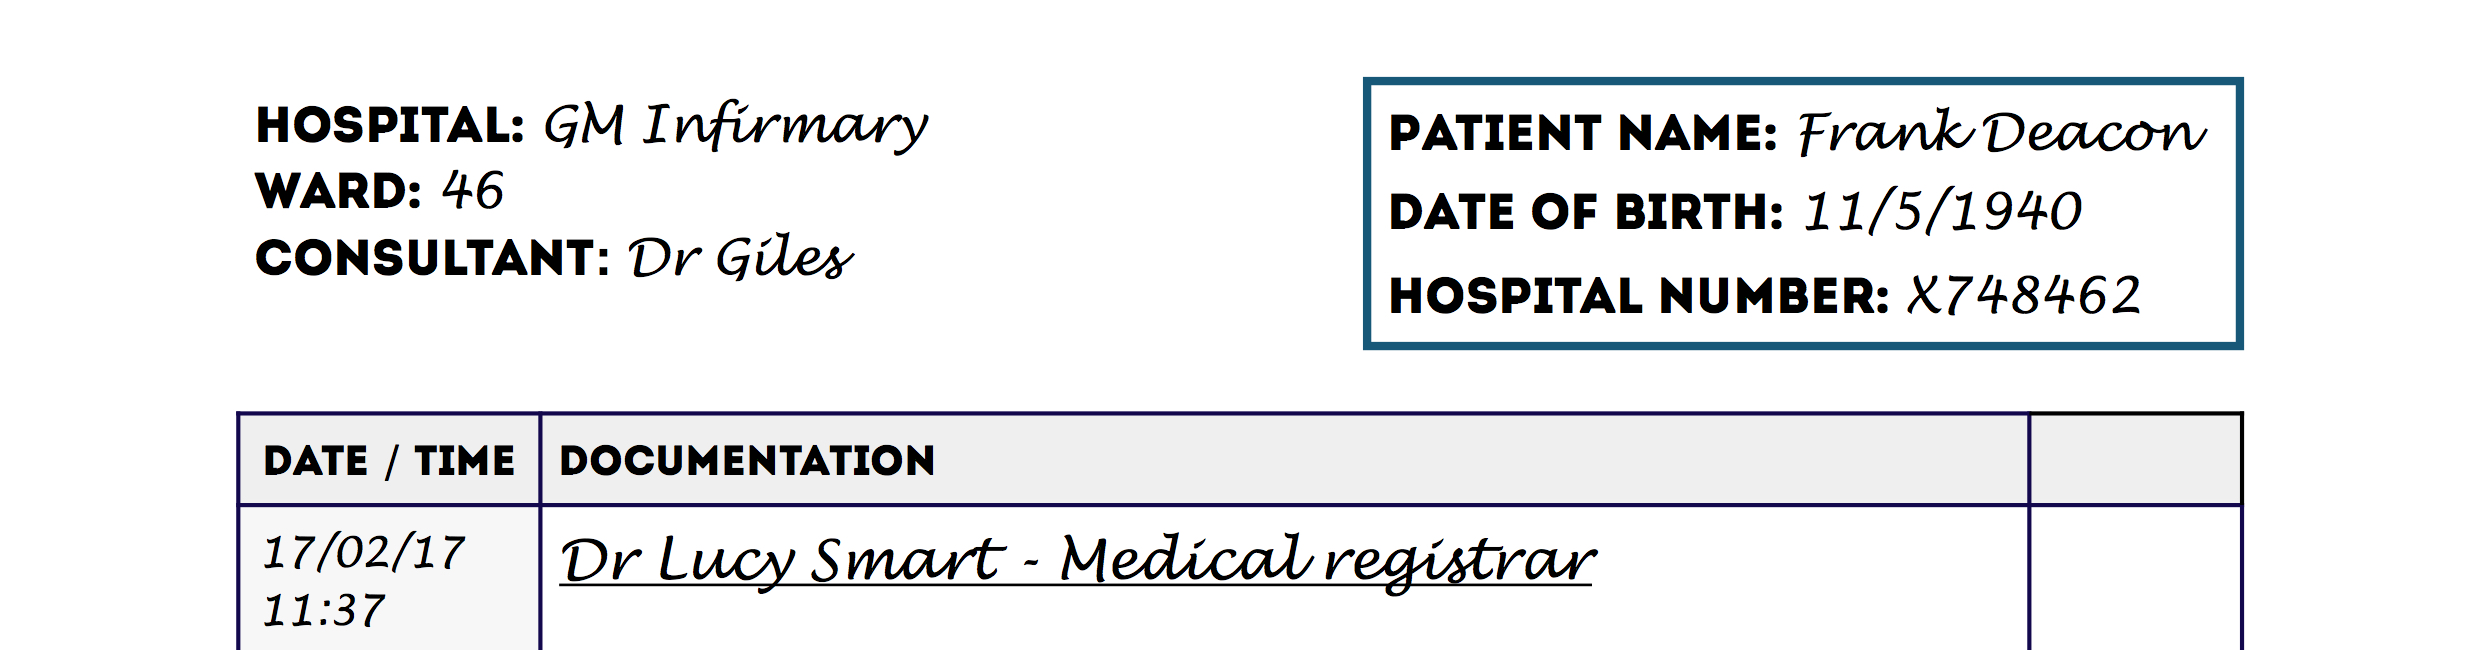 How to Document Death Confirmation  Geeky Medics Within Medical Death Note Template